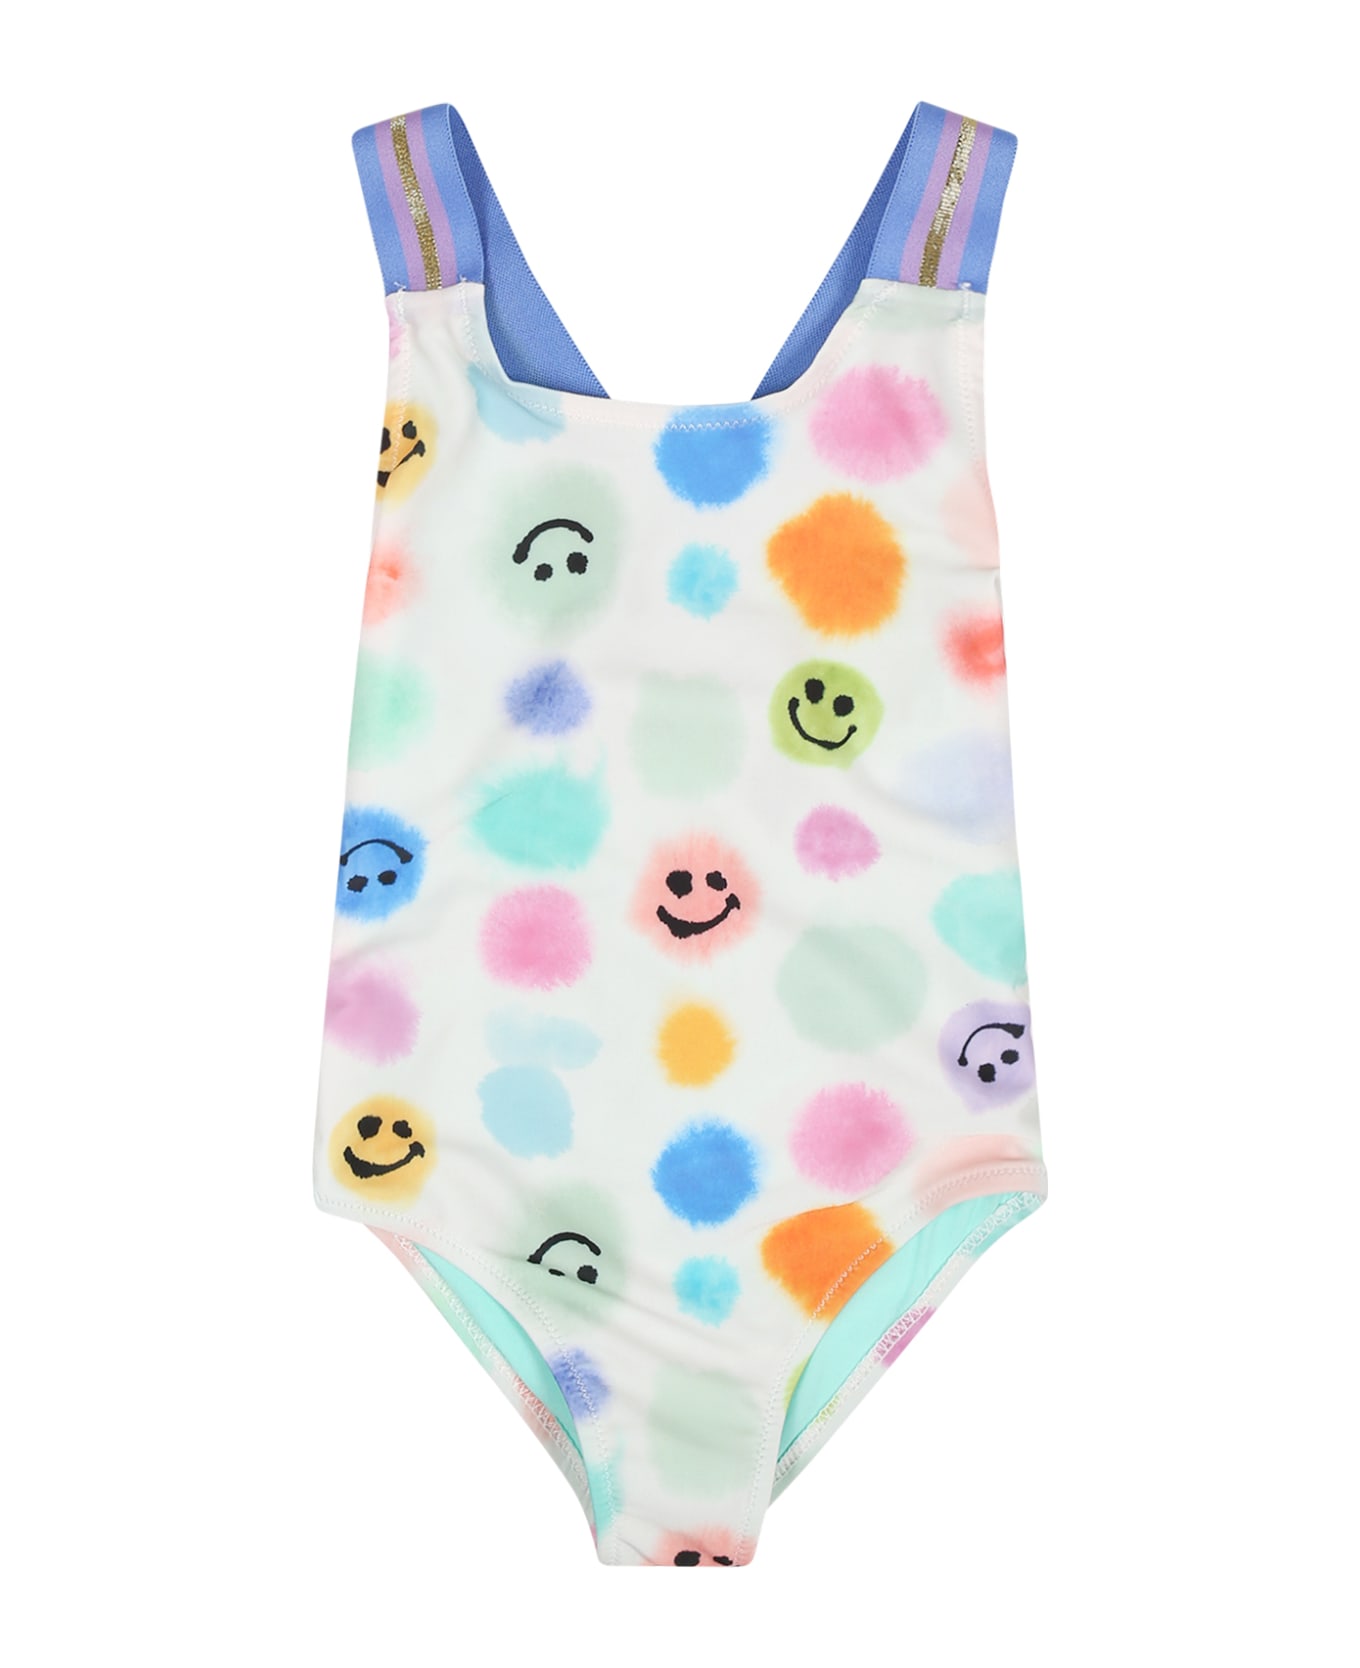 Molo White Swimsuit For Baby Girl With Polka Dots And Smiley - Multicolor